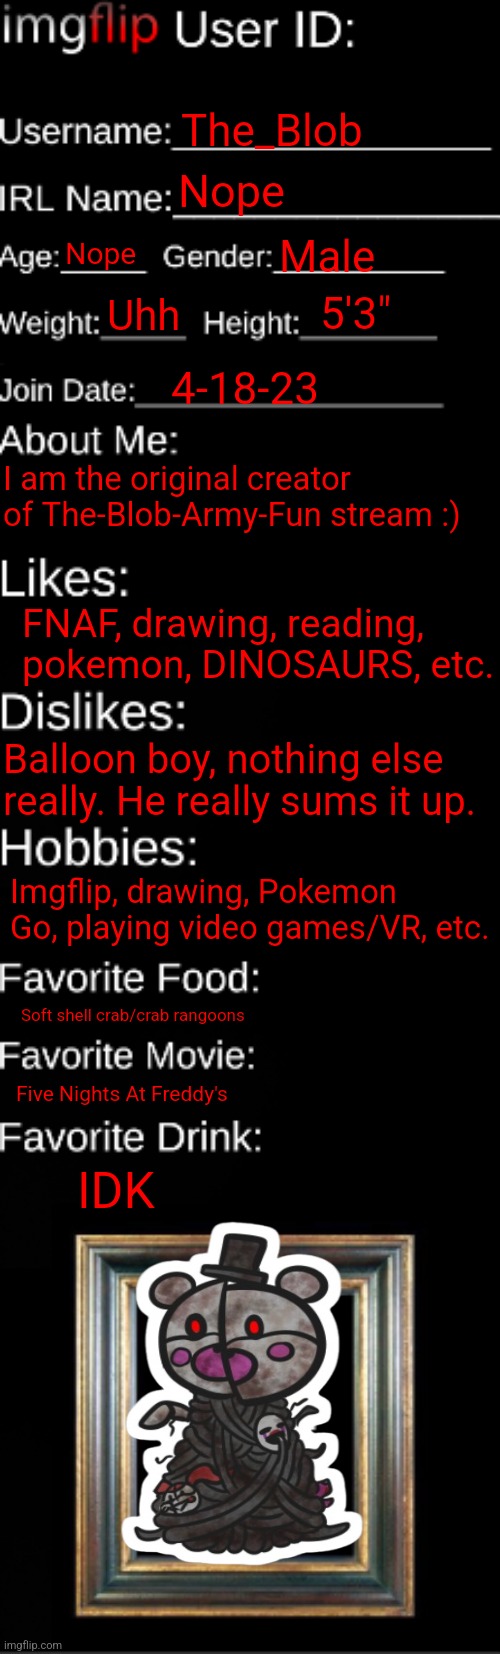 Now sliddeee to the left! | The_Blob; Nope; Nope; Male; 5'3"; Uhh; 4-18-23; I am the original creator of The-Blob-Army-Fun stream :); FNAF, drawing, reading, pokemon, DINOSAURS, etc. Balloon boy, nothing else really. He really sums it up. Imgflip, drawing, Pokemon Go, playing video games/VR, etc. Soft shell crab/crab rangoons; Five Nights At Freddy's; IDK | image tagged in imgflip id card,stay blobby | made w/ Imgflip meme maker